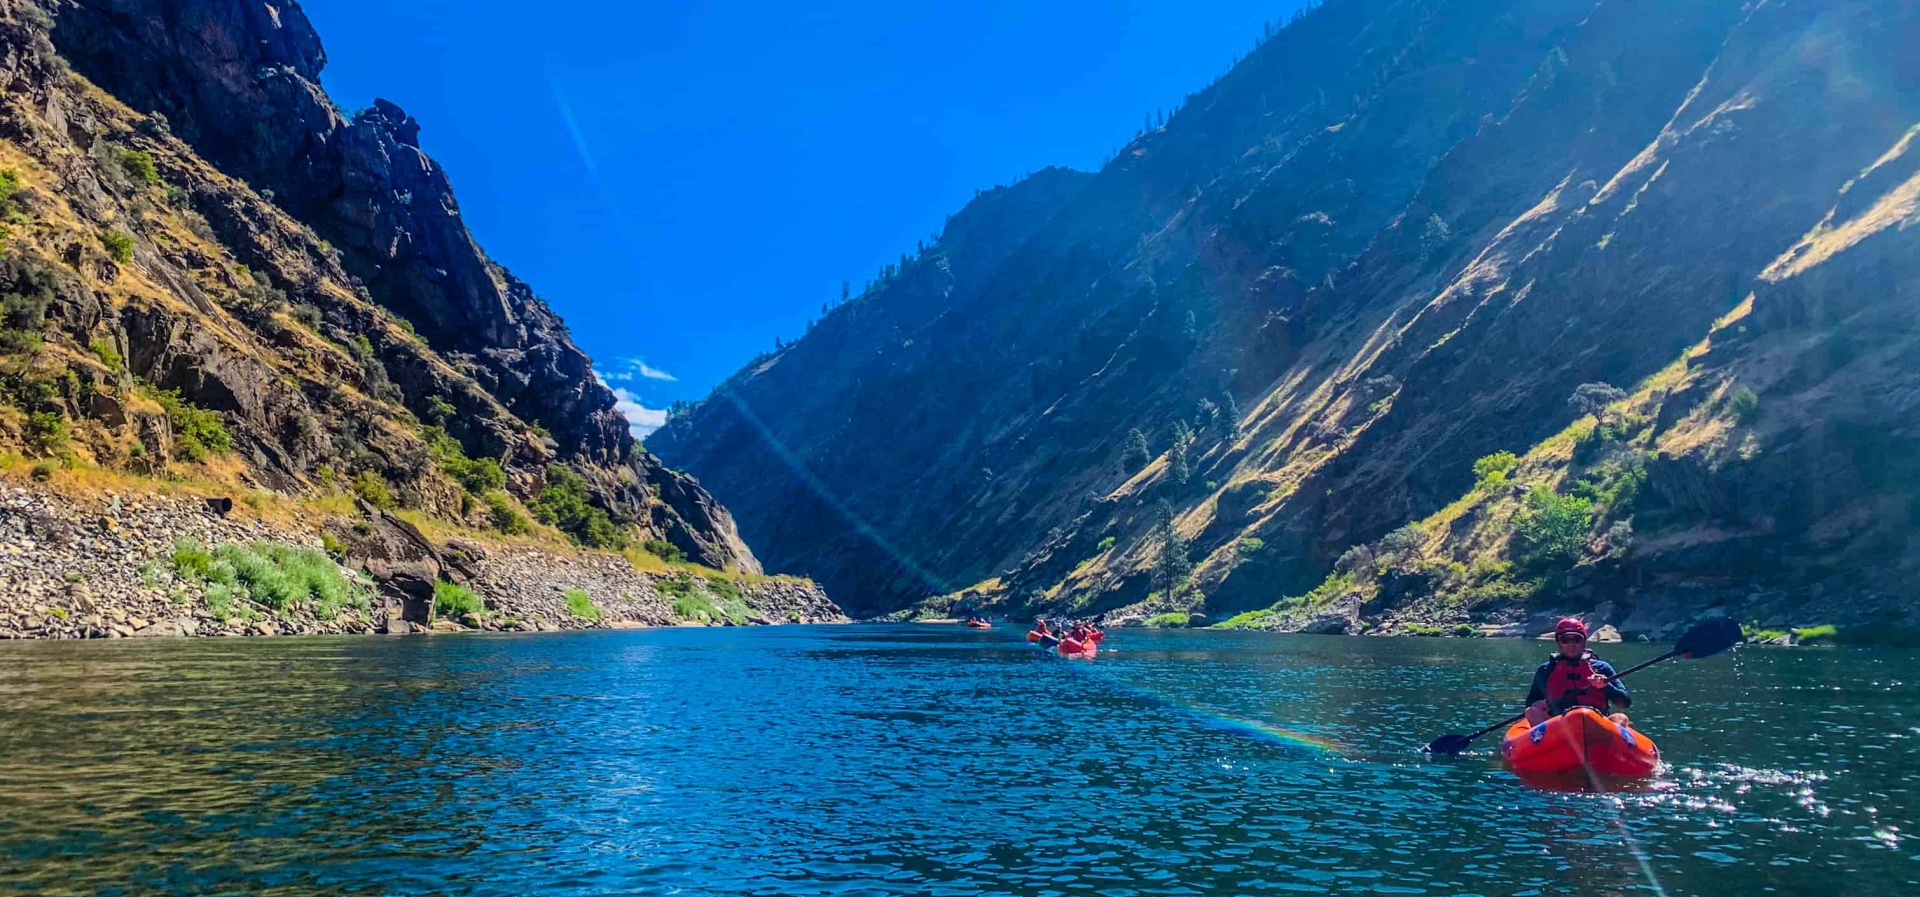 Beautiful river scenery from kayak on the Salmon River